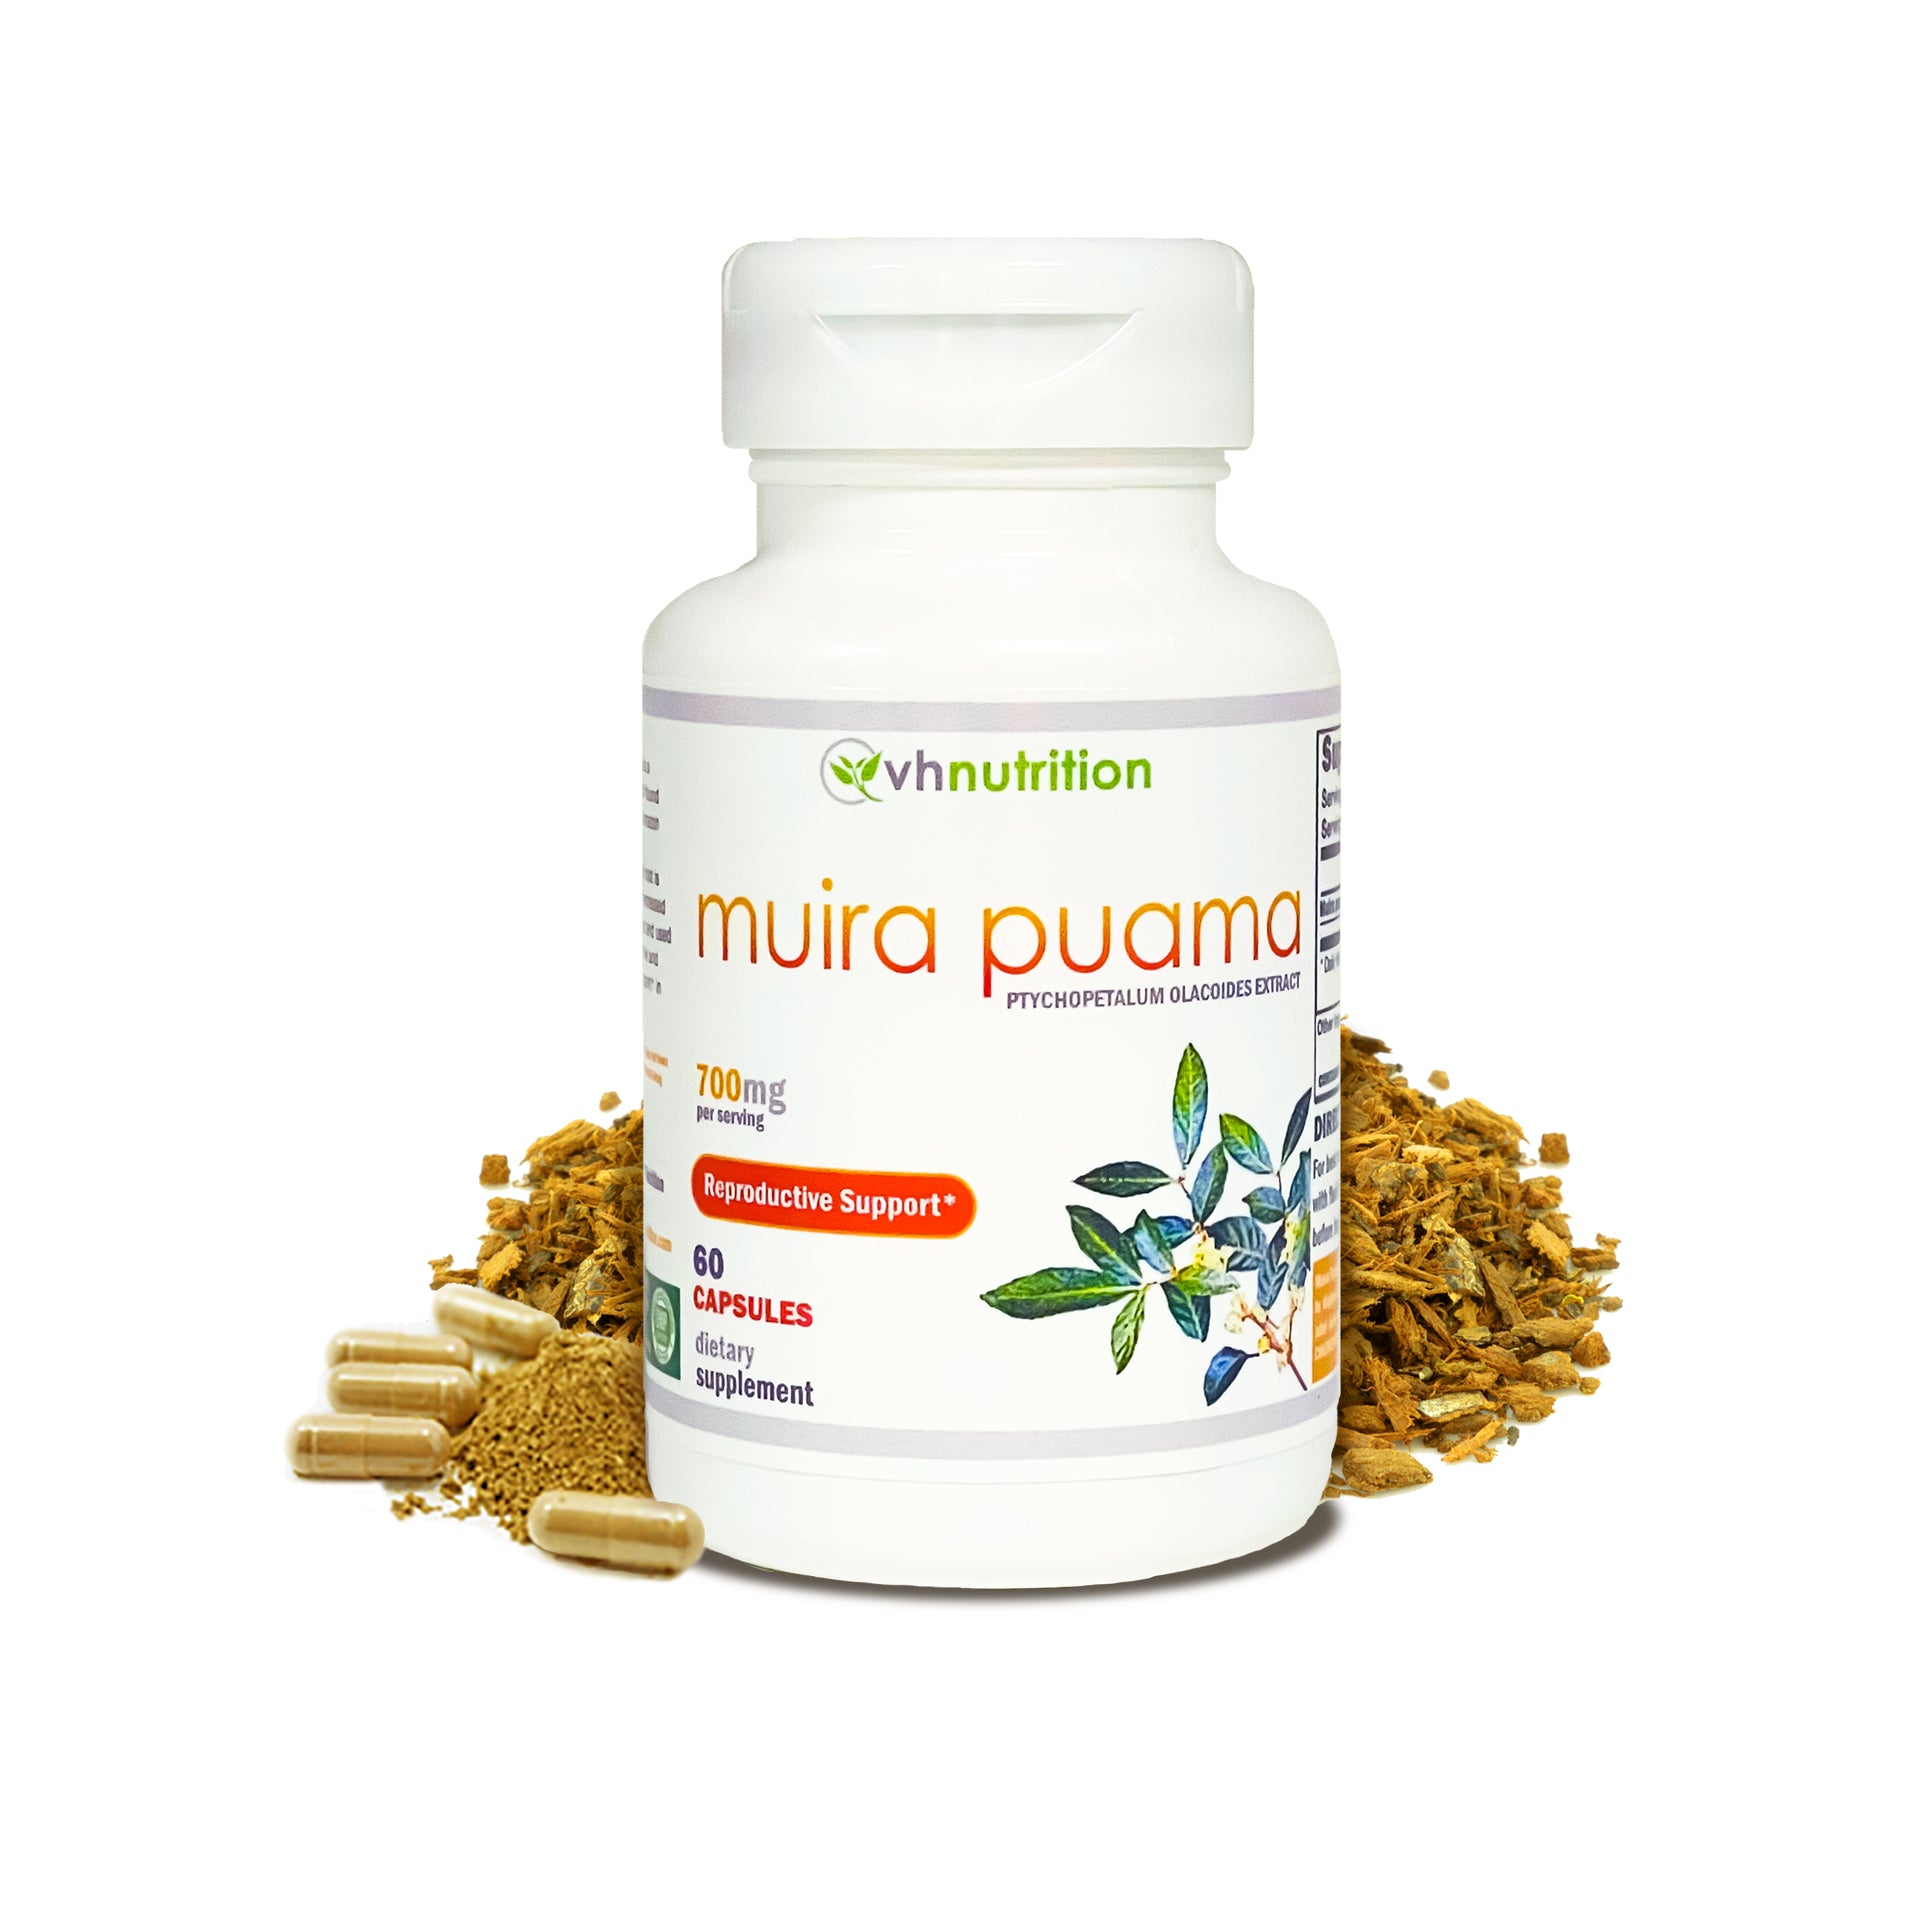 VH Nutrition MUIRA PUAMA | Extra Strength Reproductive Support for Men* | 700mg Per Serving | Standardized Ptychopetalum olacoides Extract Powder | 60 Capsules